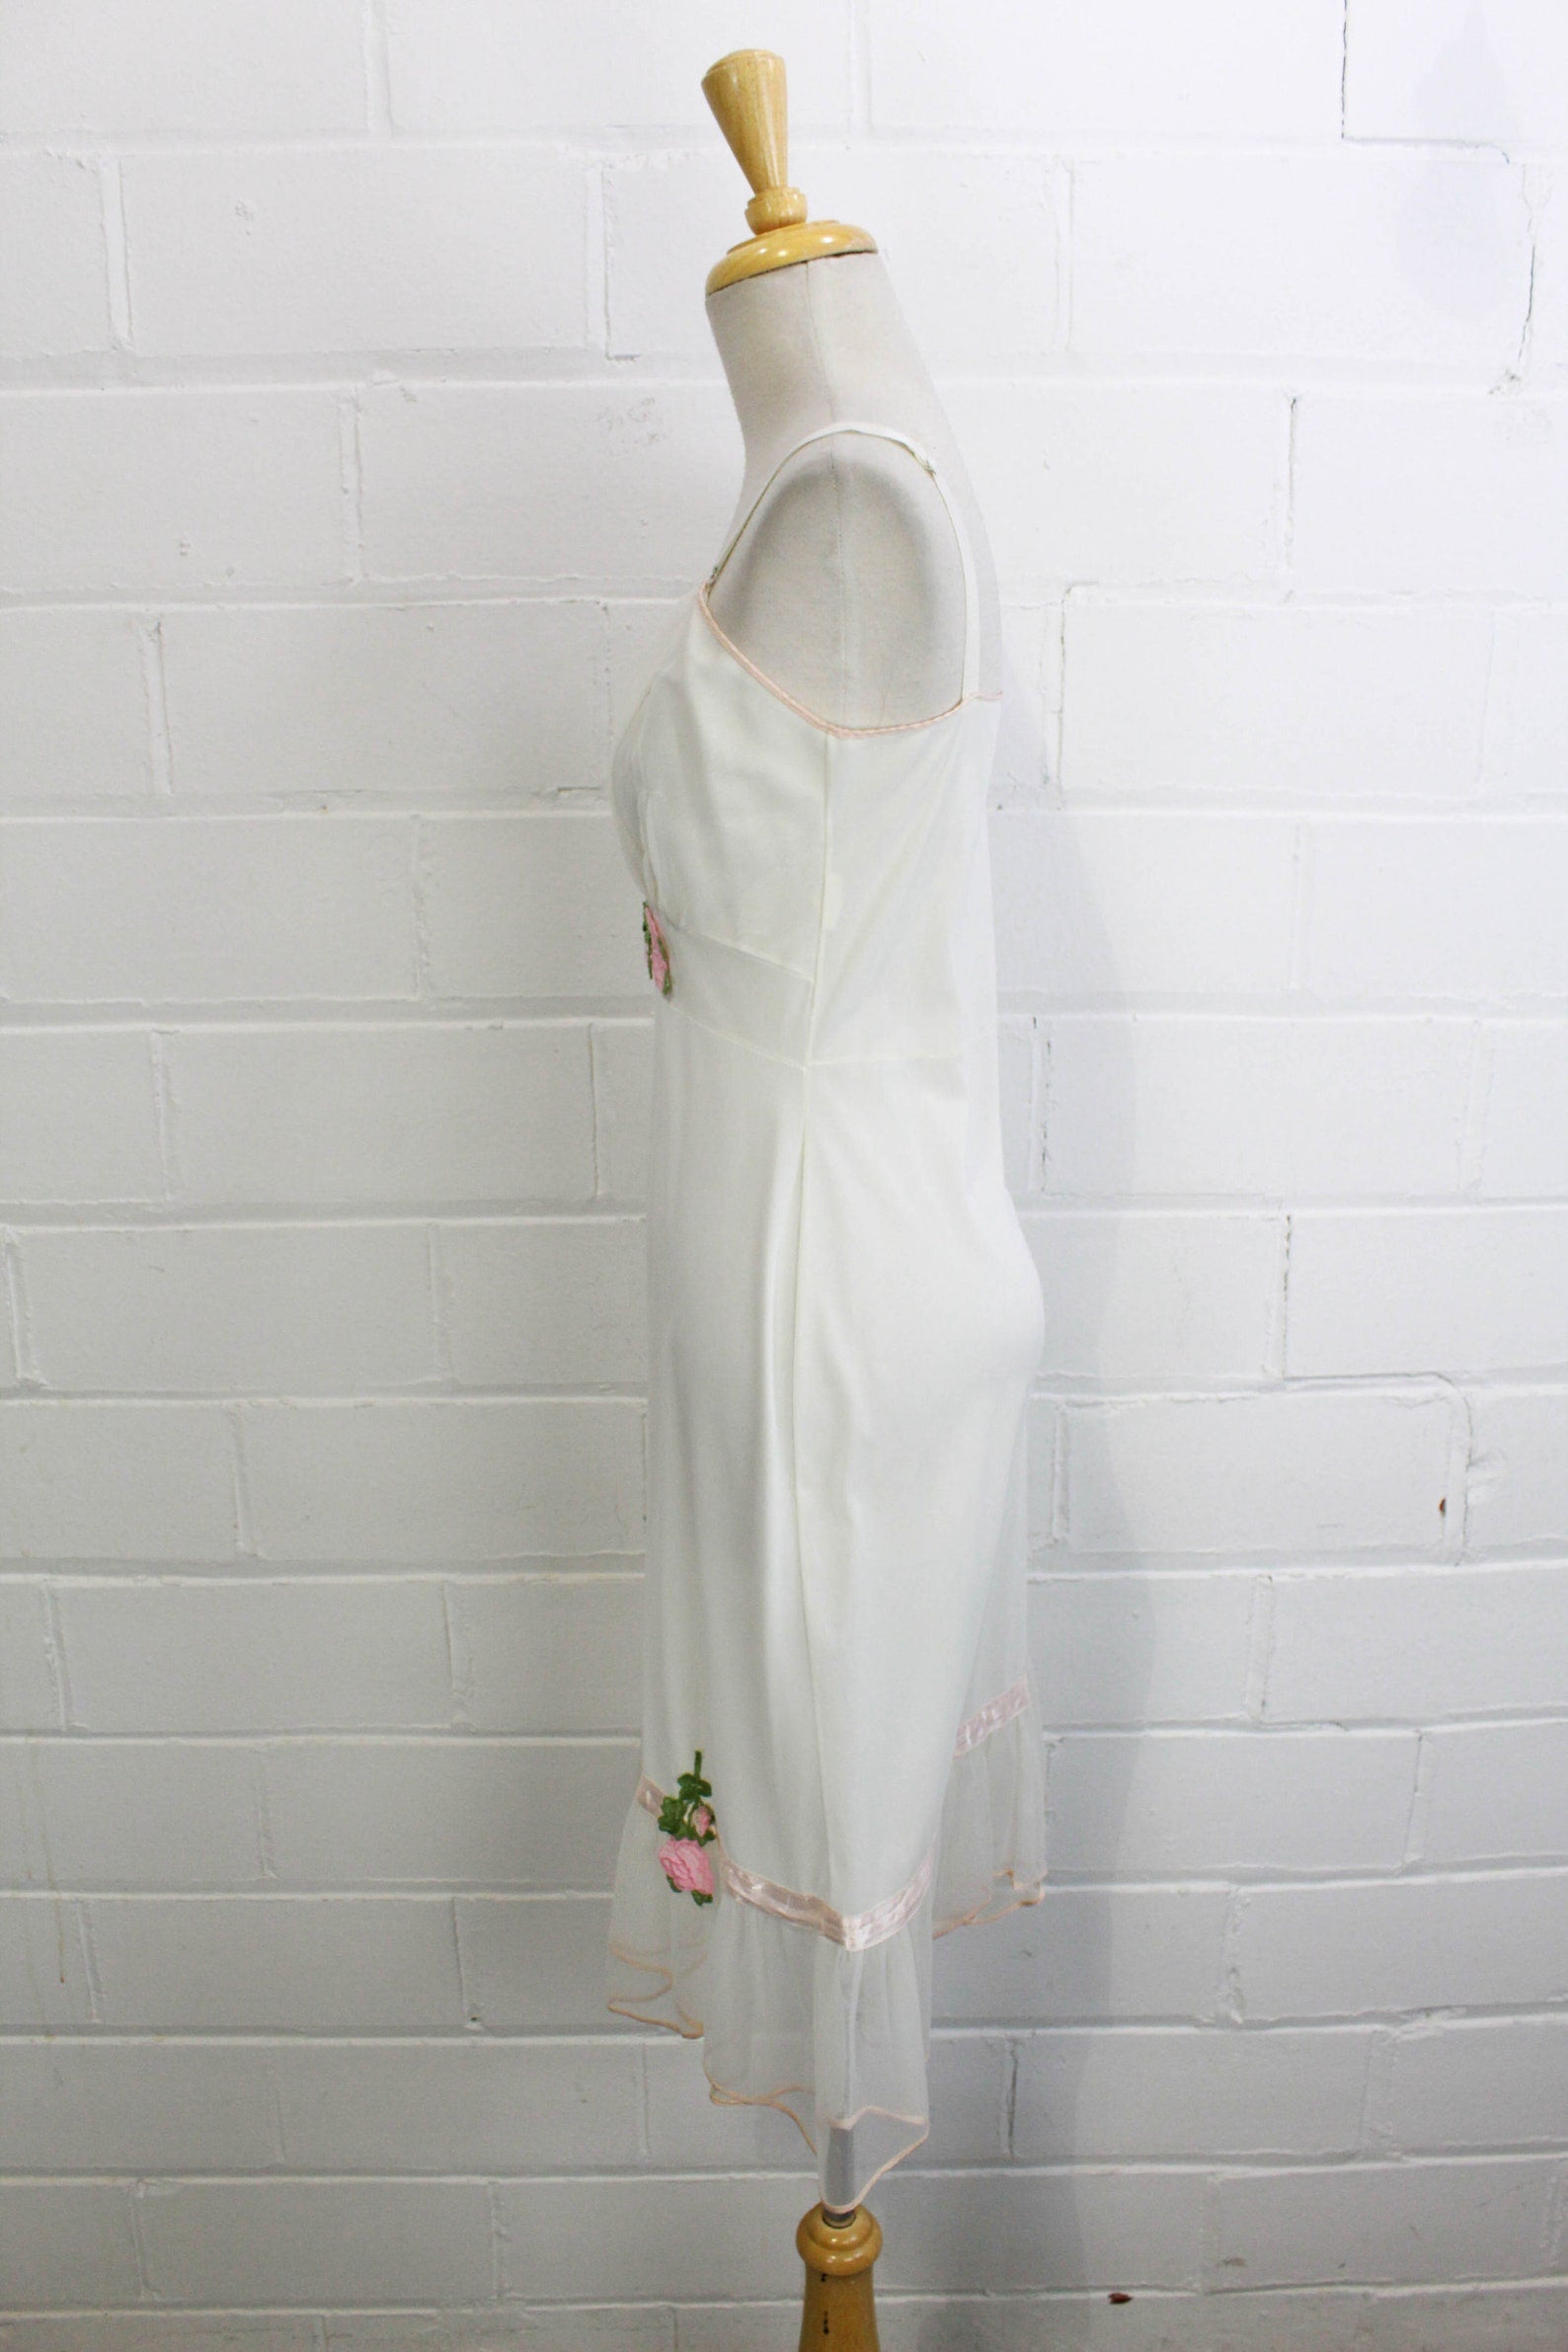 1960s White Nightgown Slip with Rose Appliques, Simone Rocha Jean Paul Gaultier Style Romantic Coquette Aesthetic